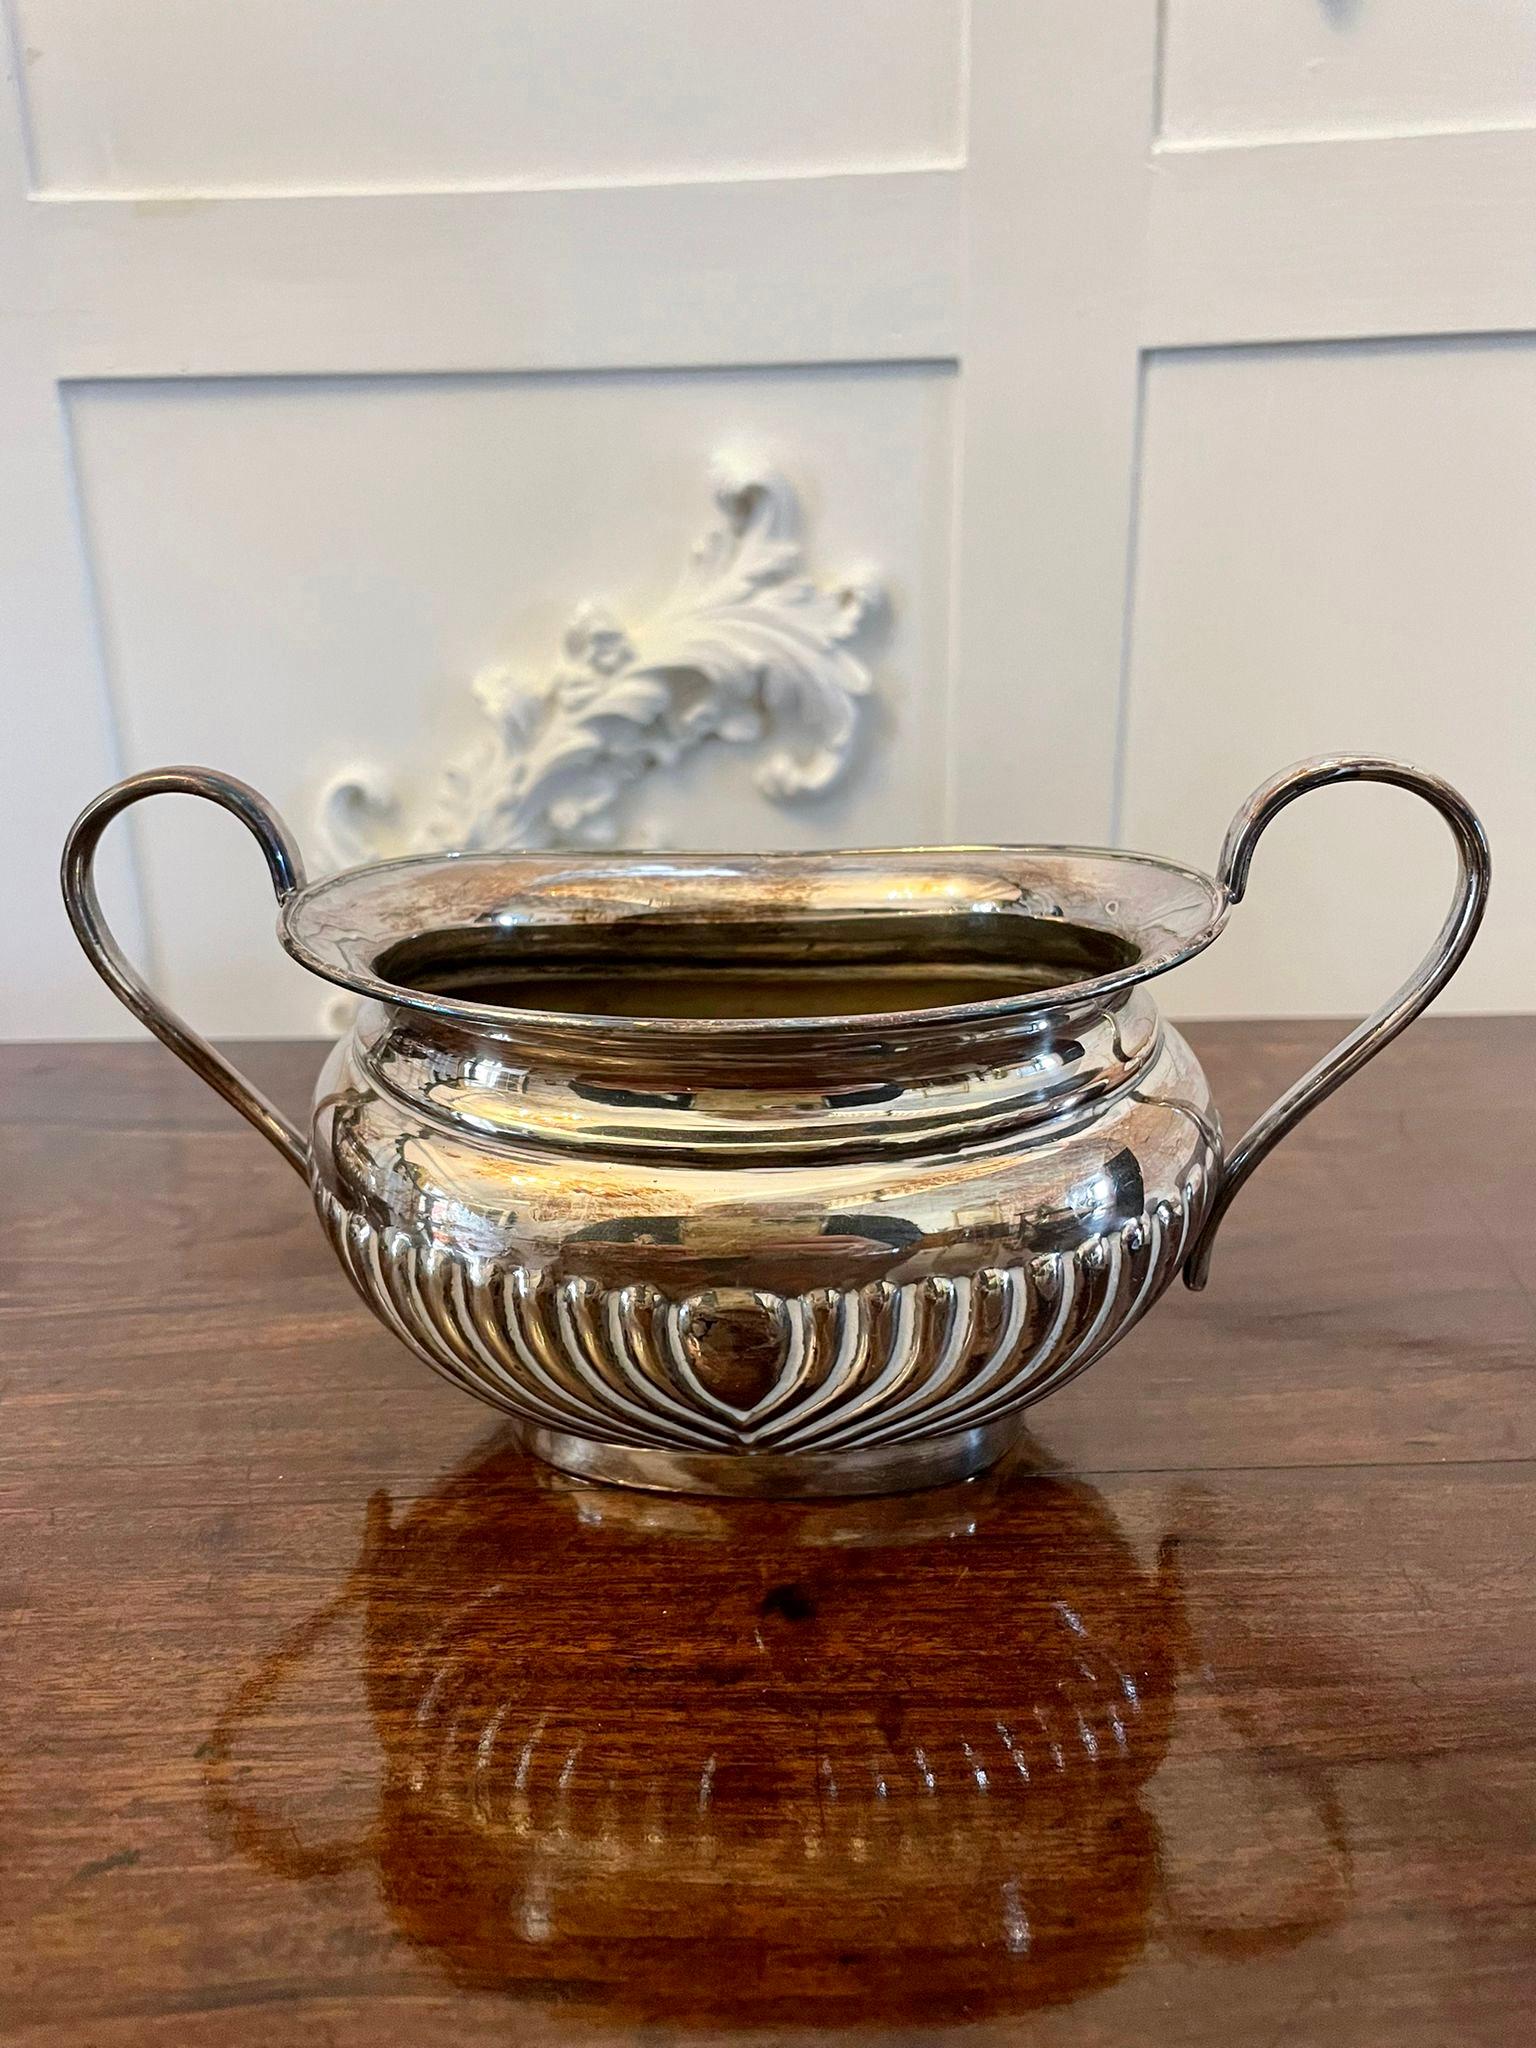 Antique Edwardian quality silver plated tea set consisting of a quality silver plated teapot, sugar bowl and milk jug. In lovely original condition 

Measures: Tea Pot H 16 x W 28.5 x D 13cm 
Milk jug H 9.5 x W 15 x D 7cm 
Sugar bowl H 8.5 x W